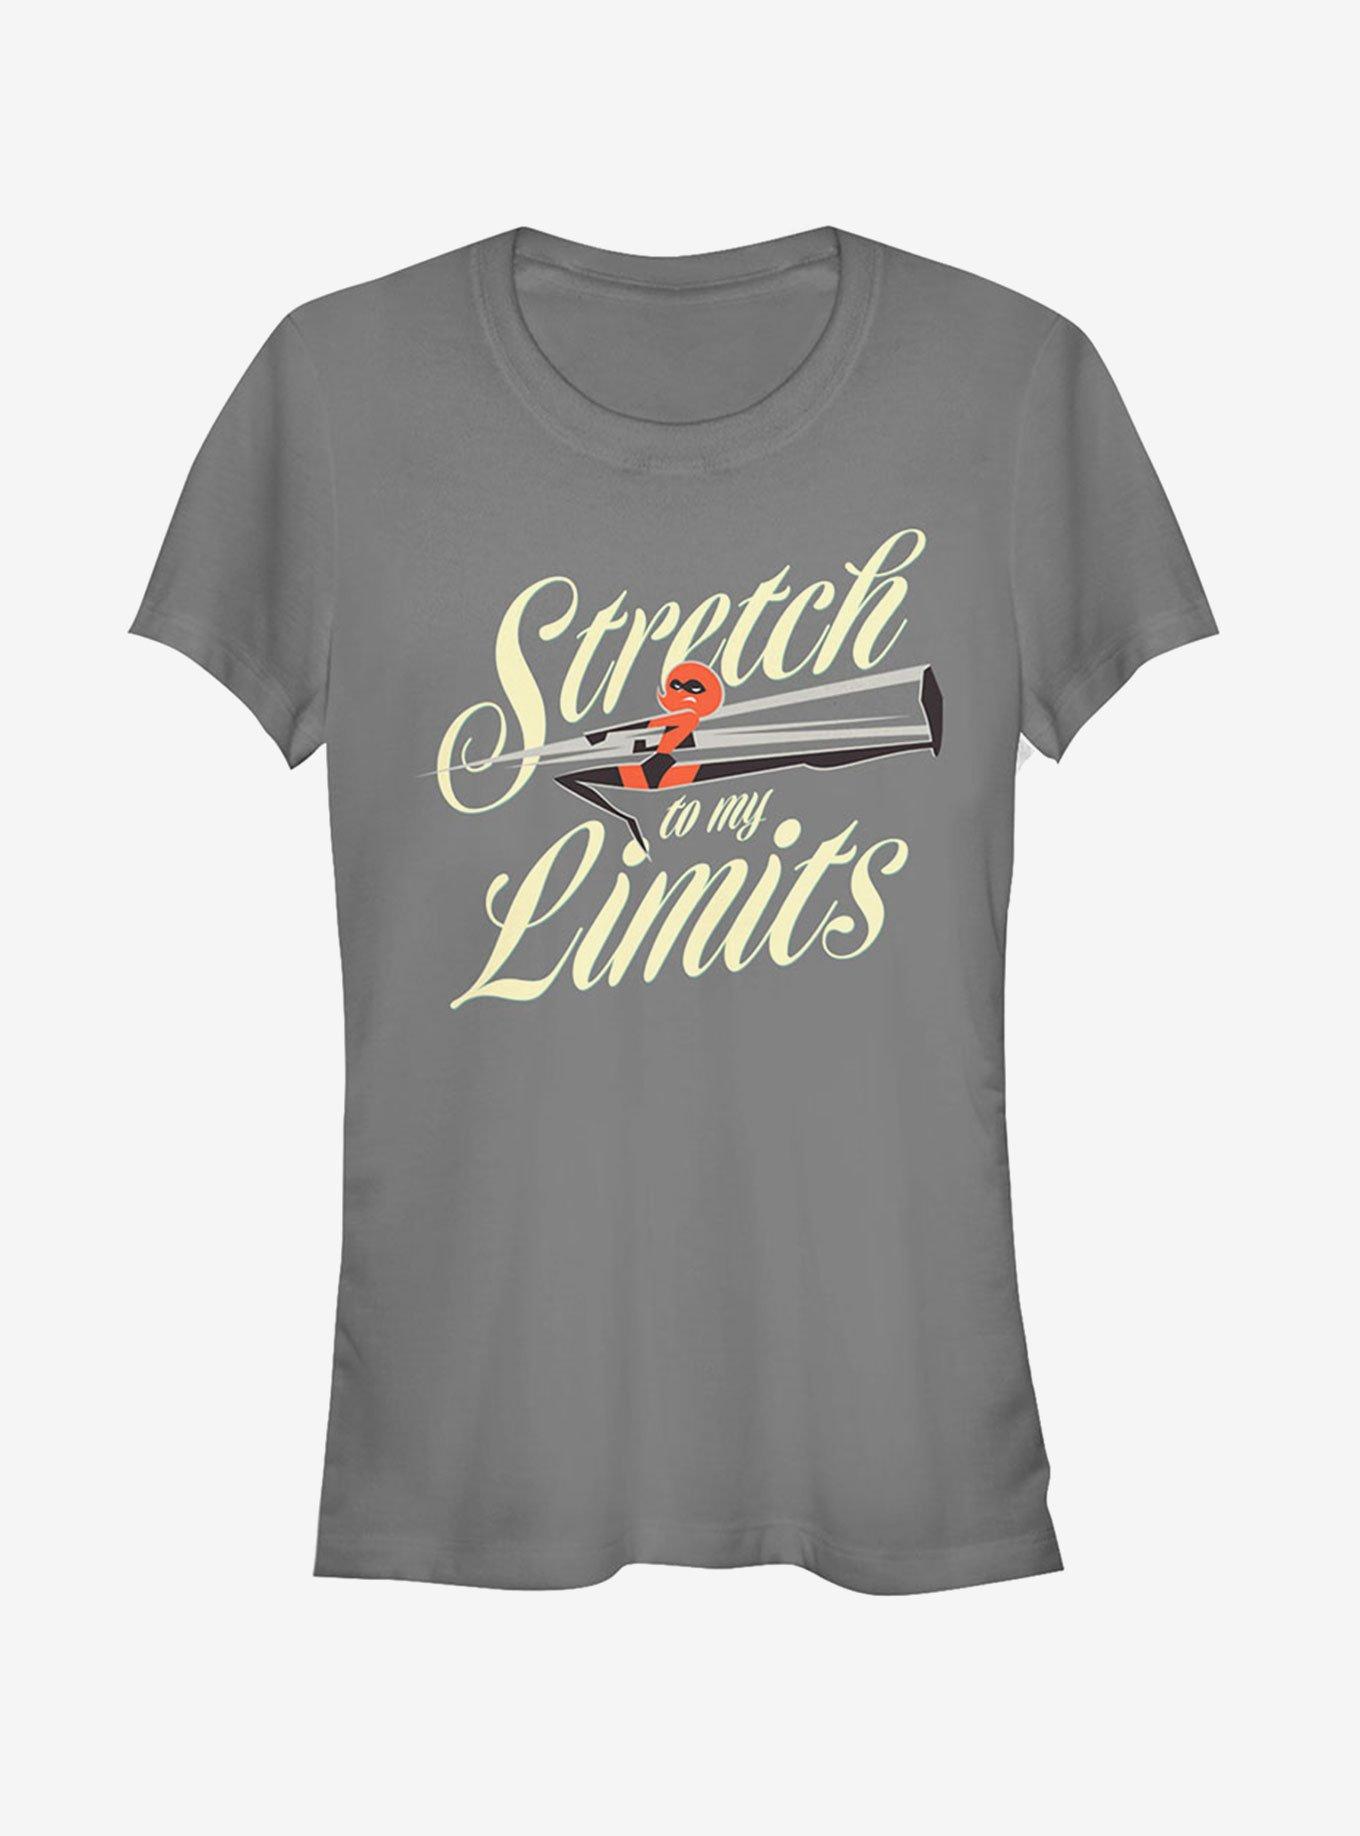 Disney Pixar The Incredibles Stretch to My Limits Girls T-Shirt, CHARCOAL, hi-res